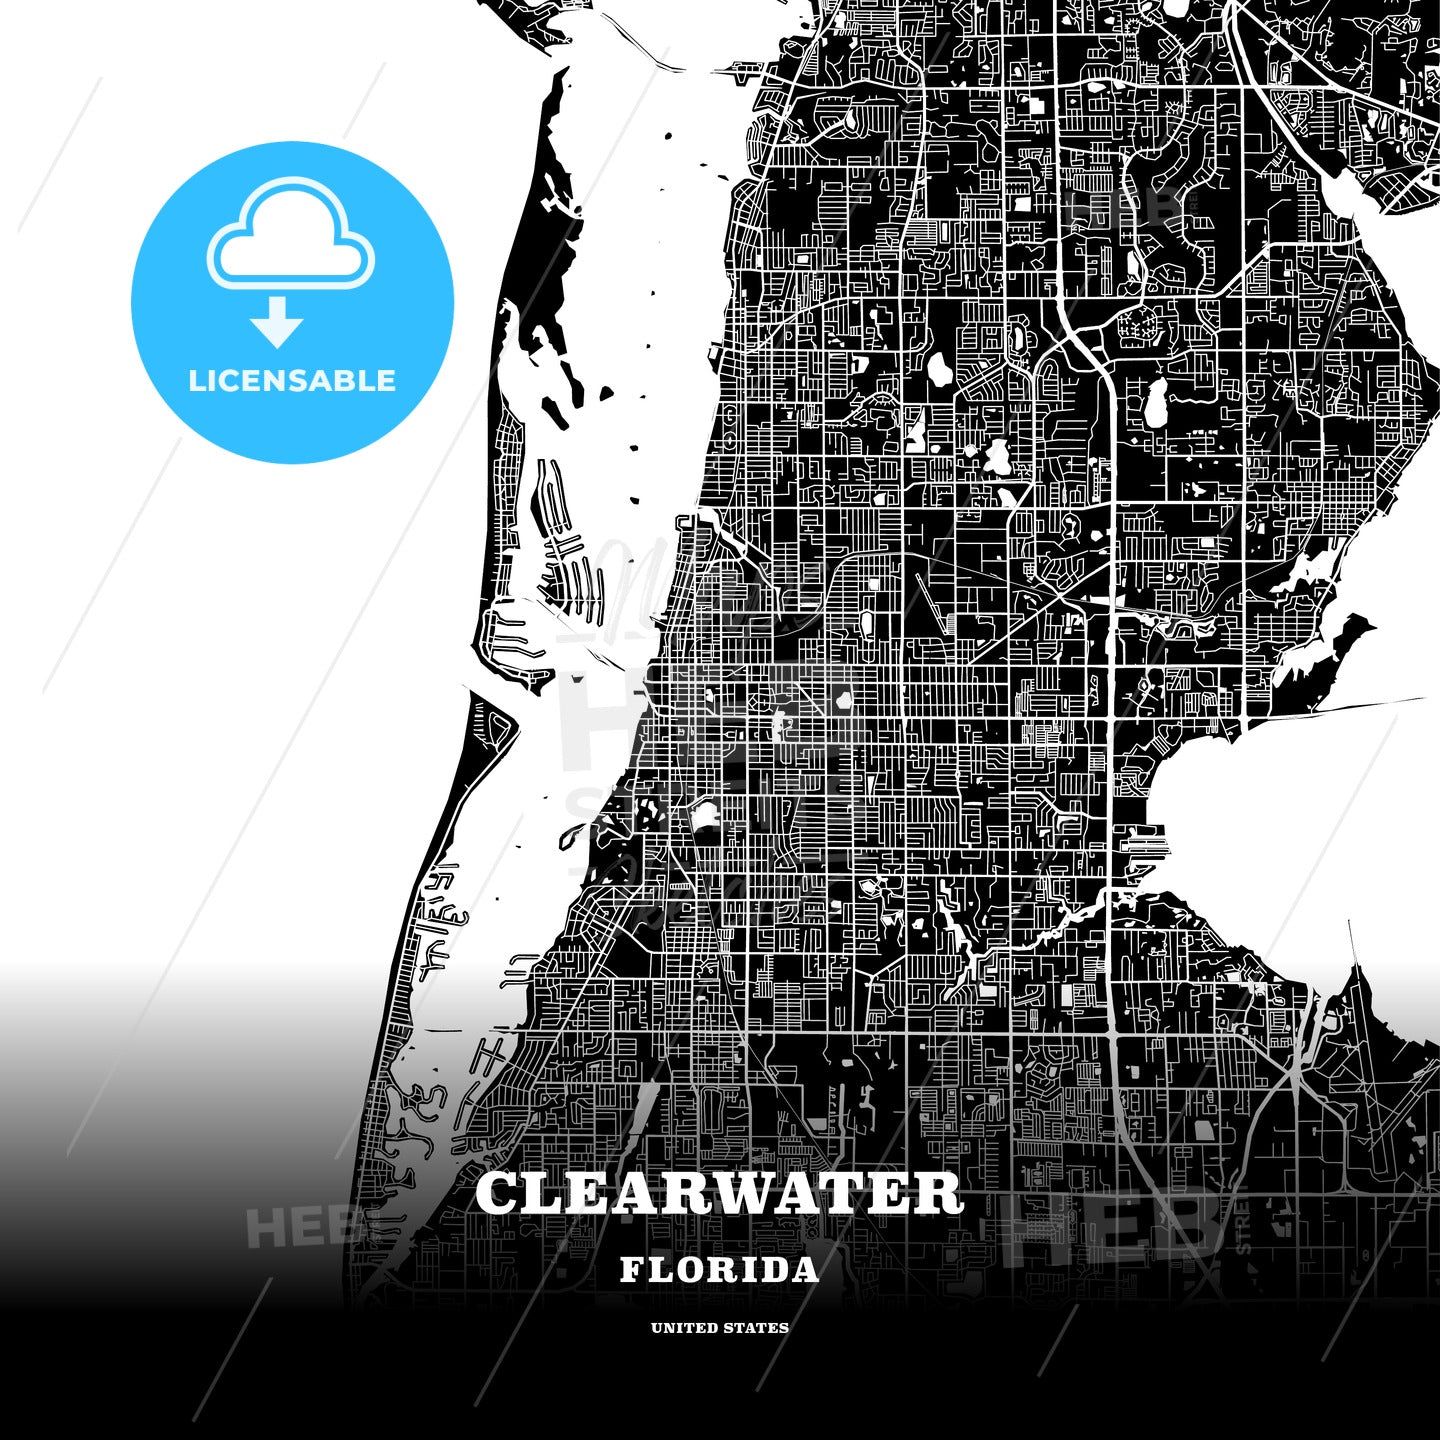 Clearwater, Florida, USA map